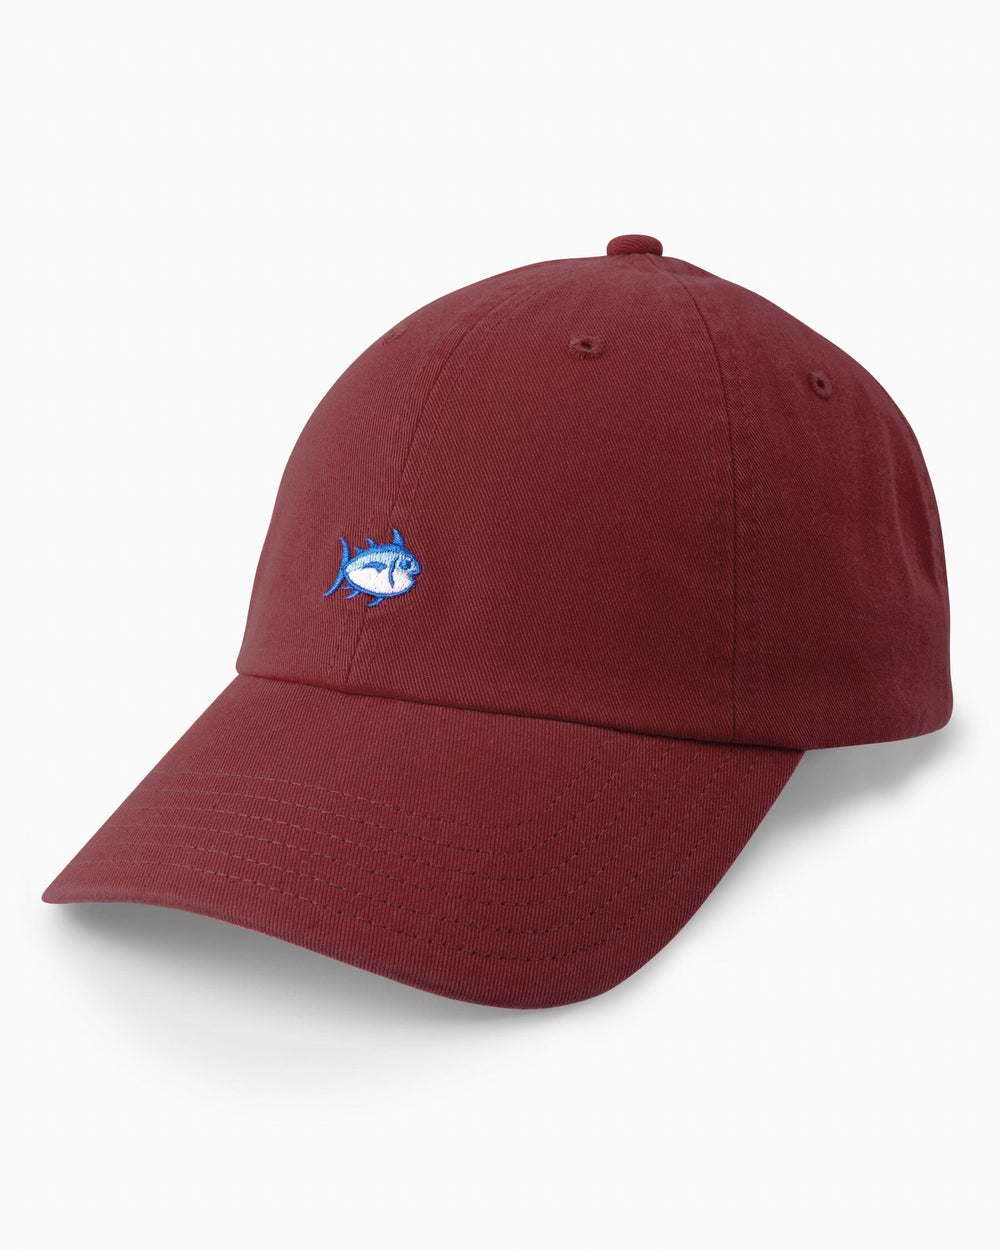 The front view of the Team Colors Skipjack Hat by Southern Tide - Chianti